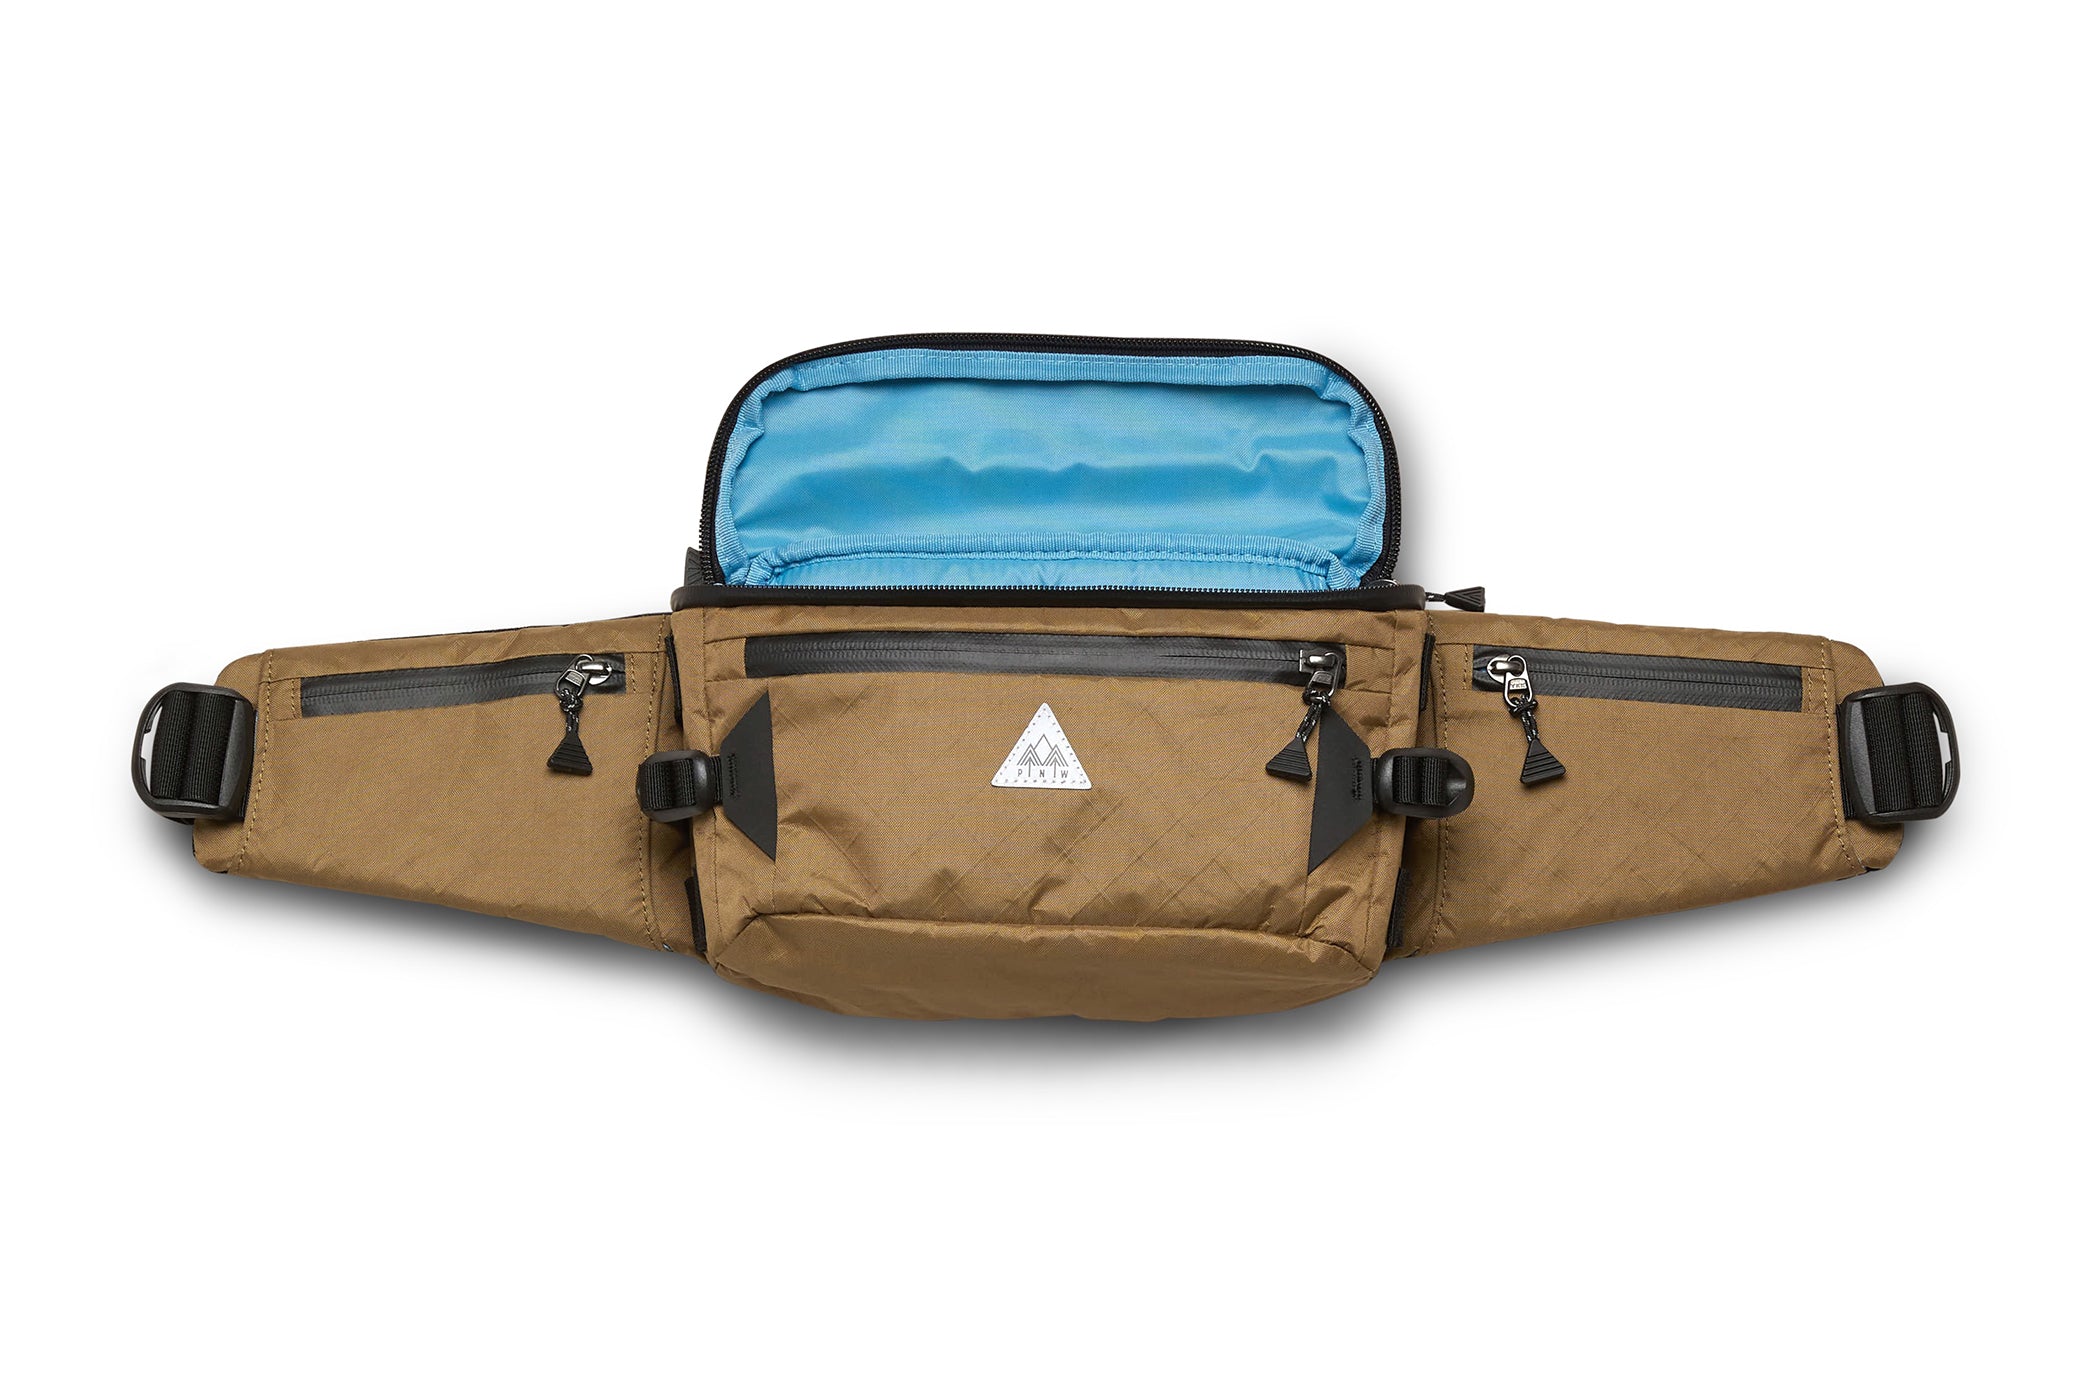 Pnw Components Rover Hip Pack (Star Dust)